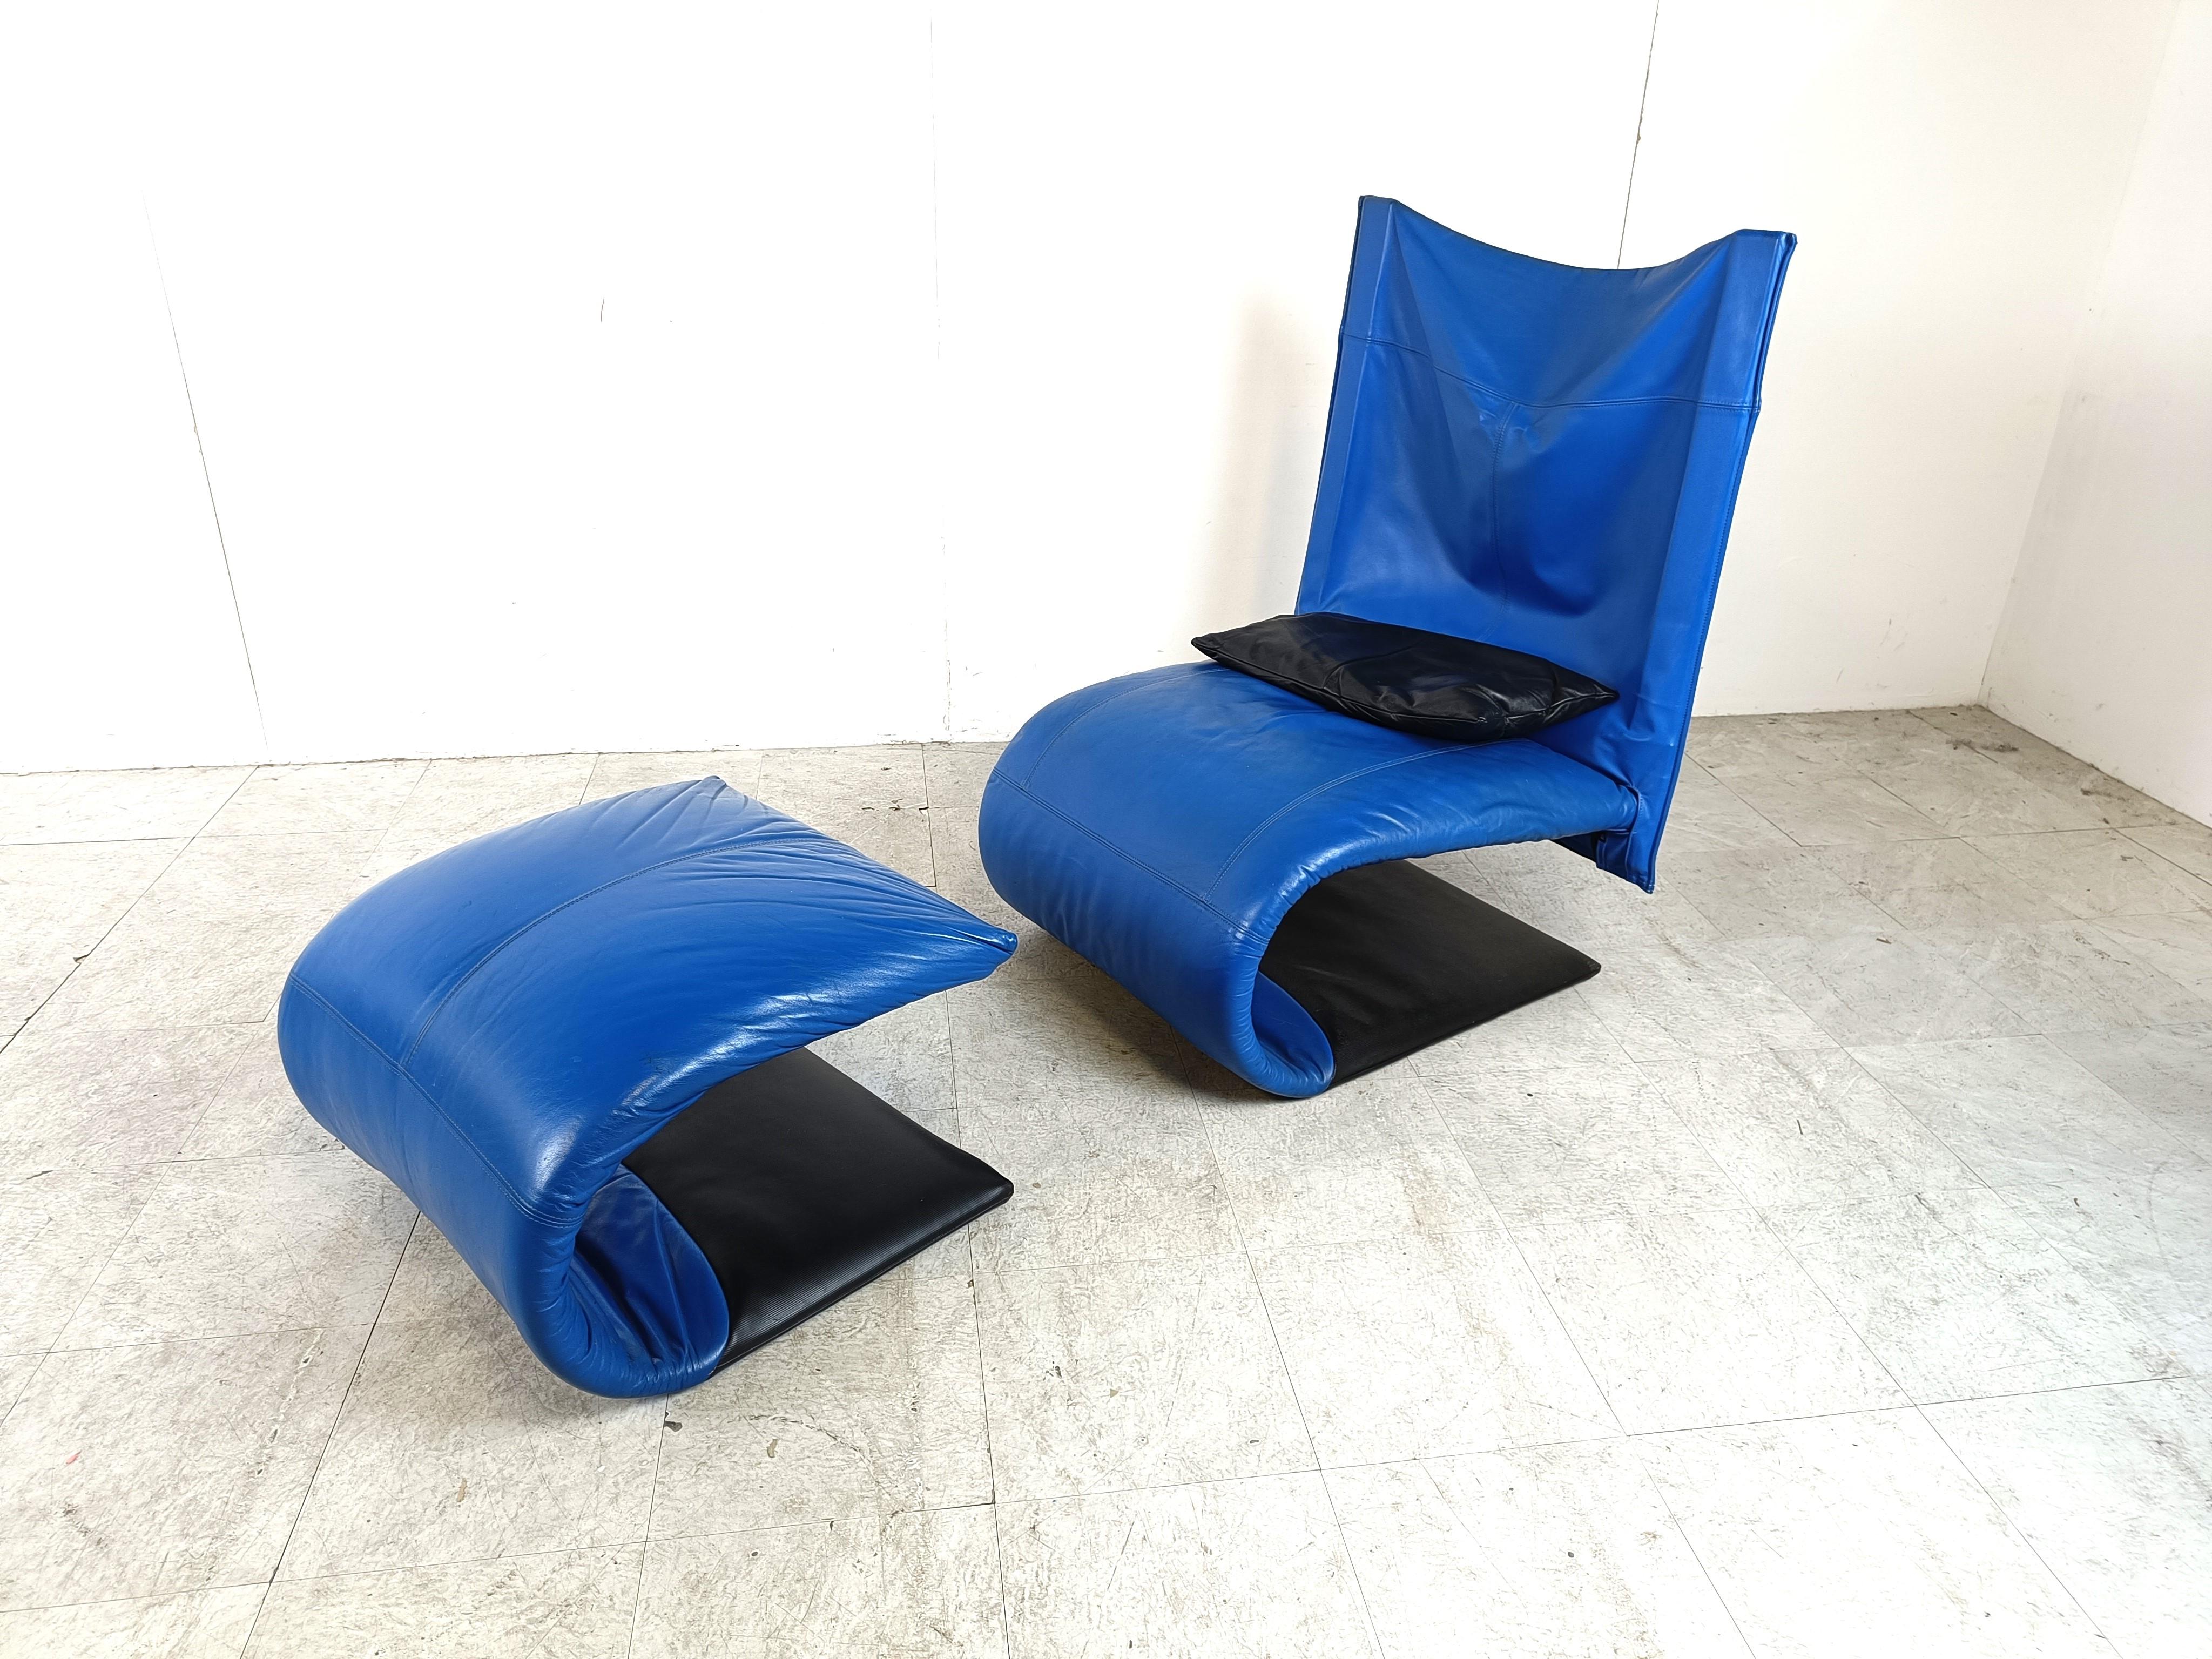 Striking black and blue leather 'Zen' lounge chair with ottoman designed by Claude Brison for Ligne Roset.

Complete with black leather cushion, this lounge sofa is very very comfortable and has a modern design.

Good condition and vibrant blue